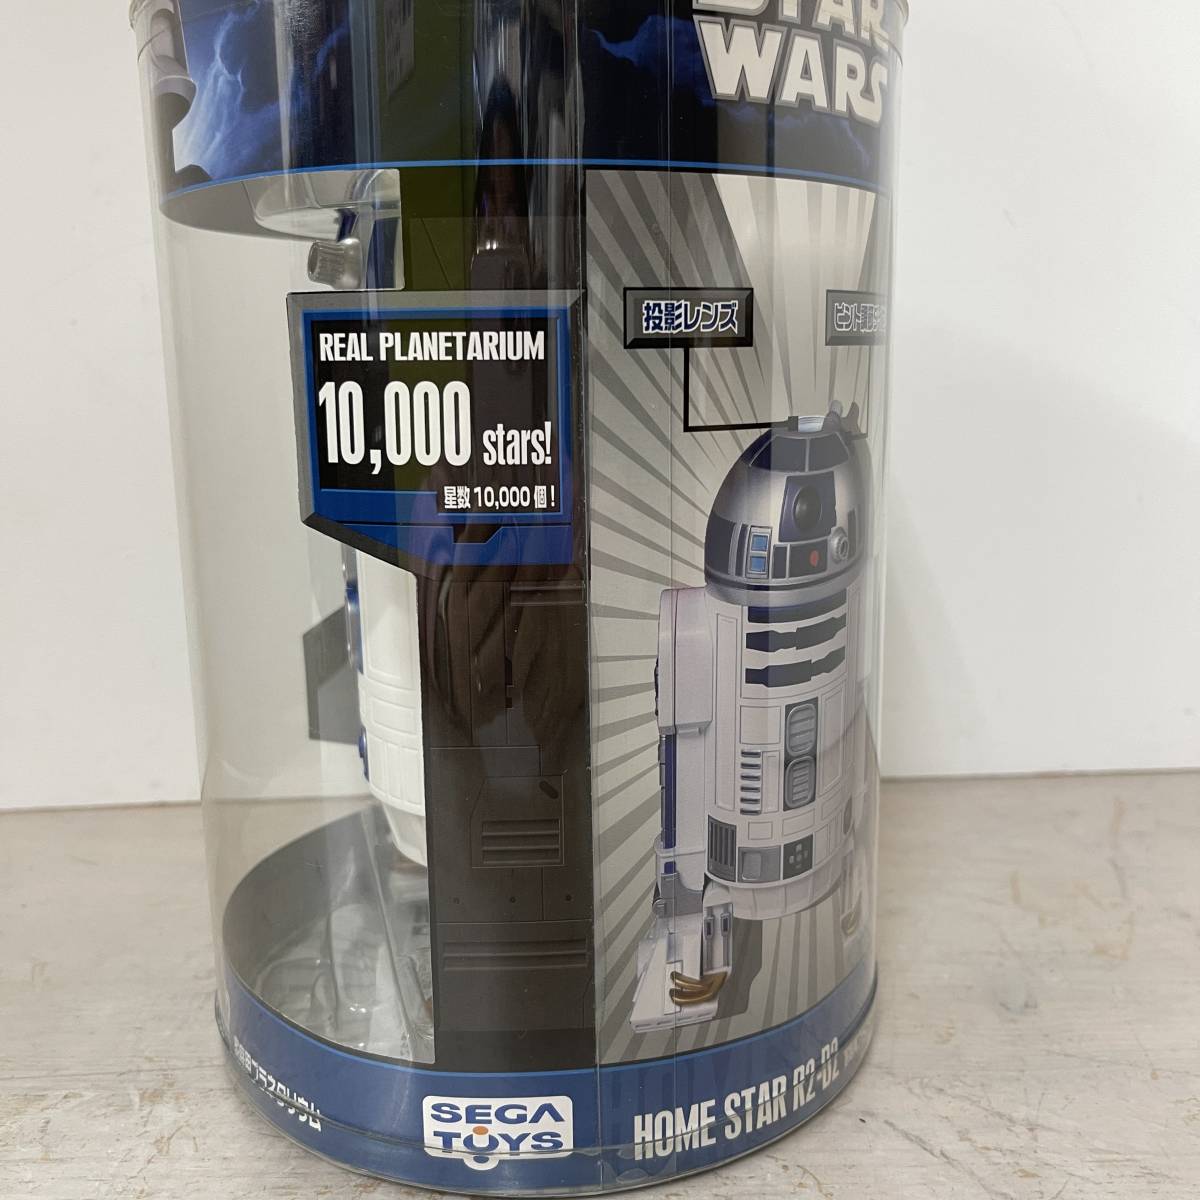 2950　HOME STAR R2-D2　家庭用プラネタリウム★未使用品★　セガトイズ_画像2